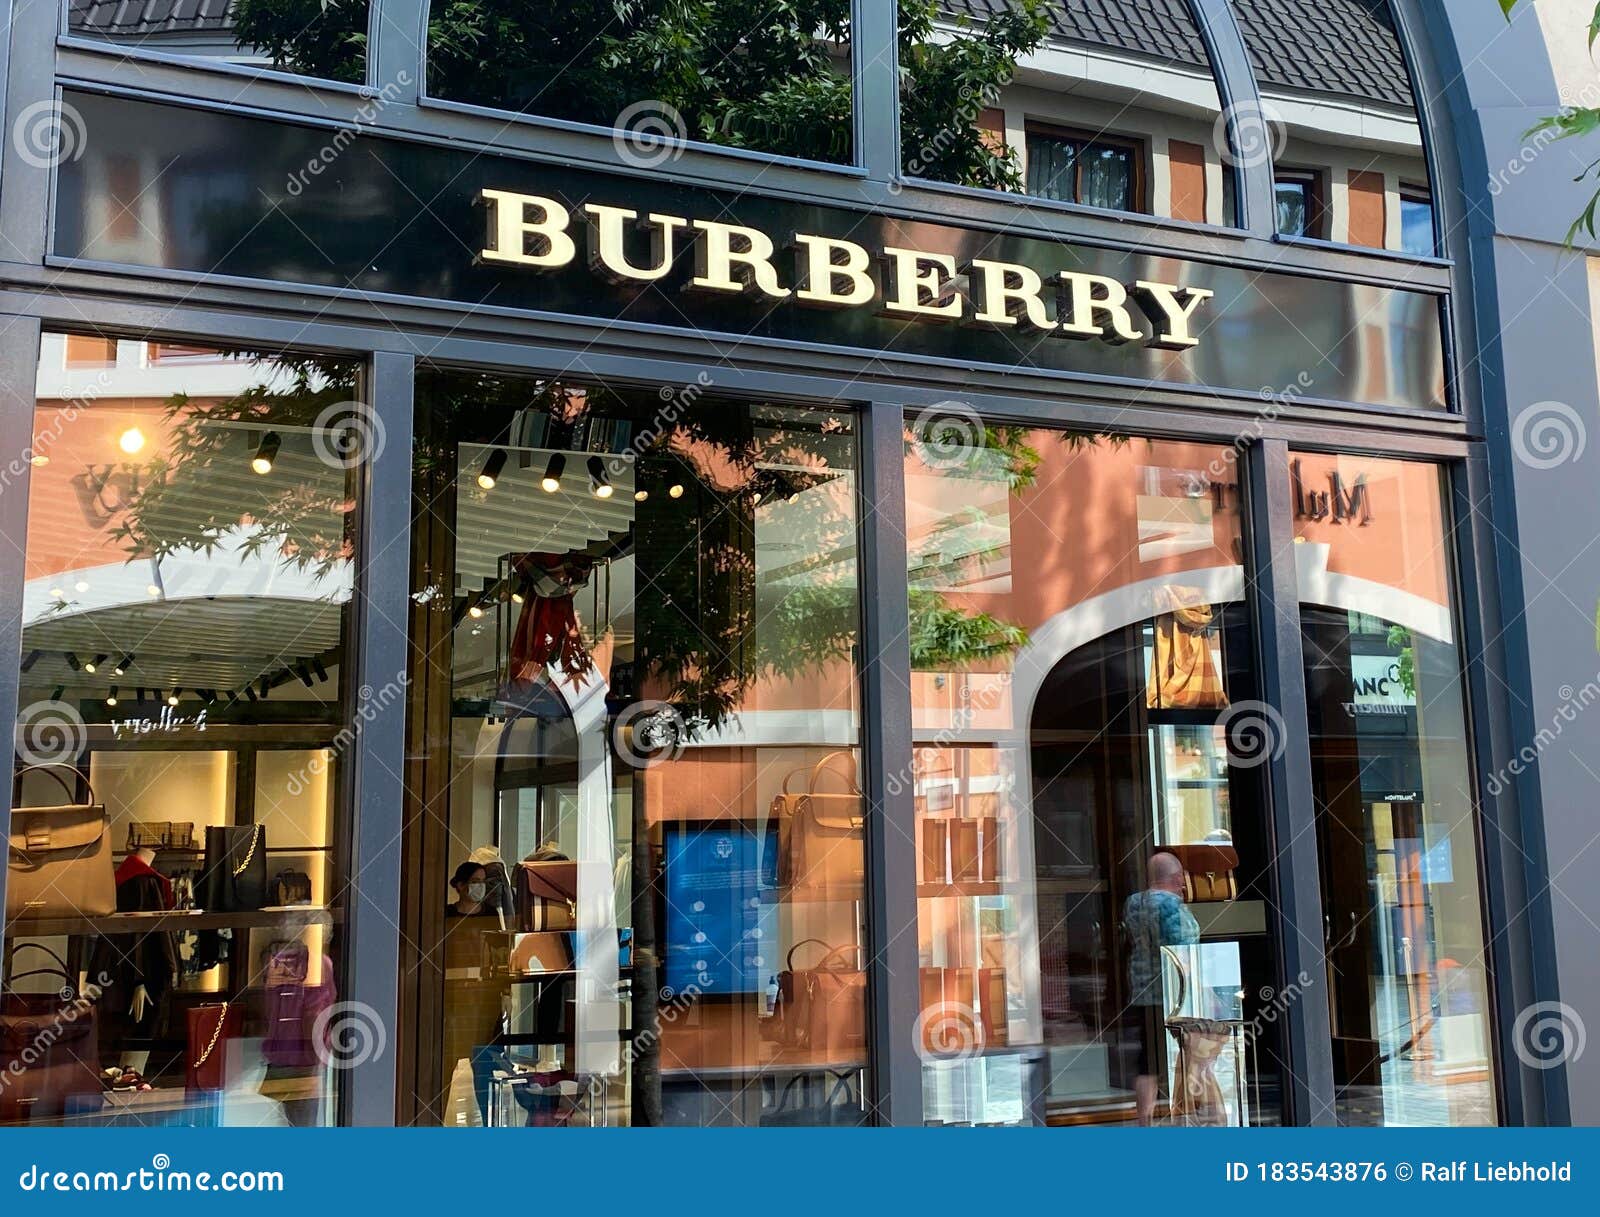 View on Facade with Logo Lettering of Burberry Fashion Company at Shop  Entrance Editorial Photo - Image of showcase, retail: 183543876